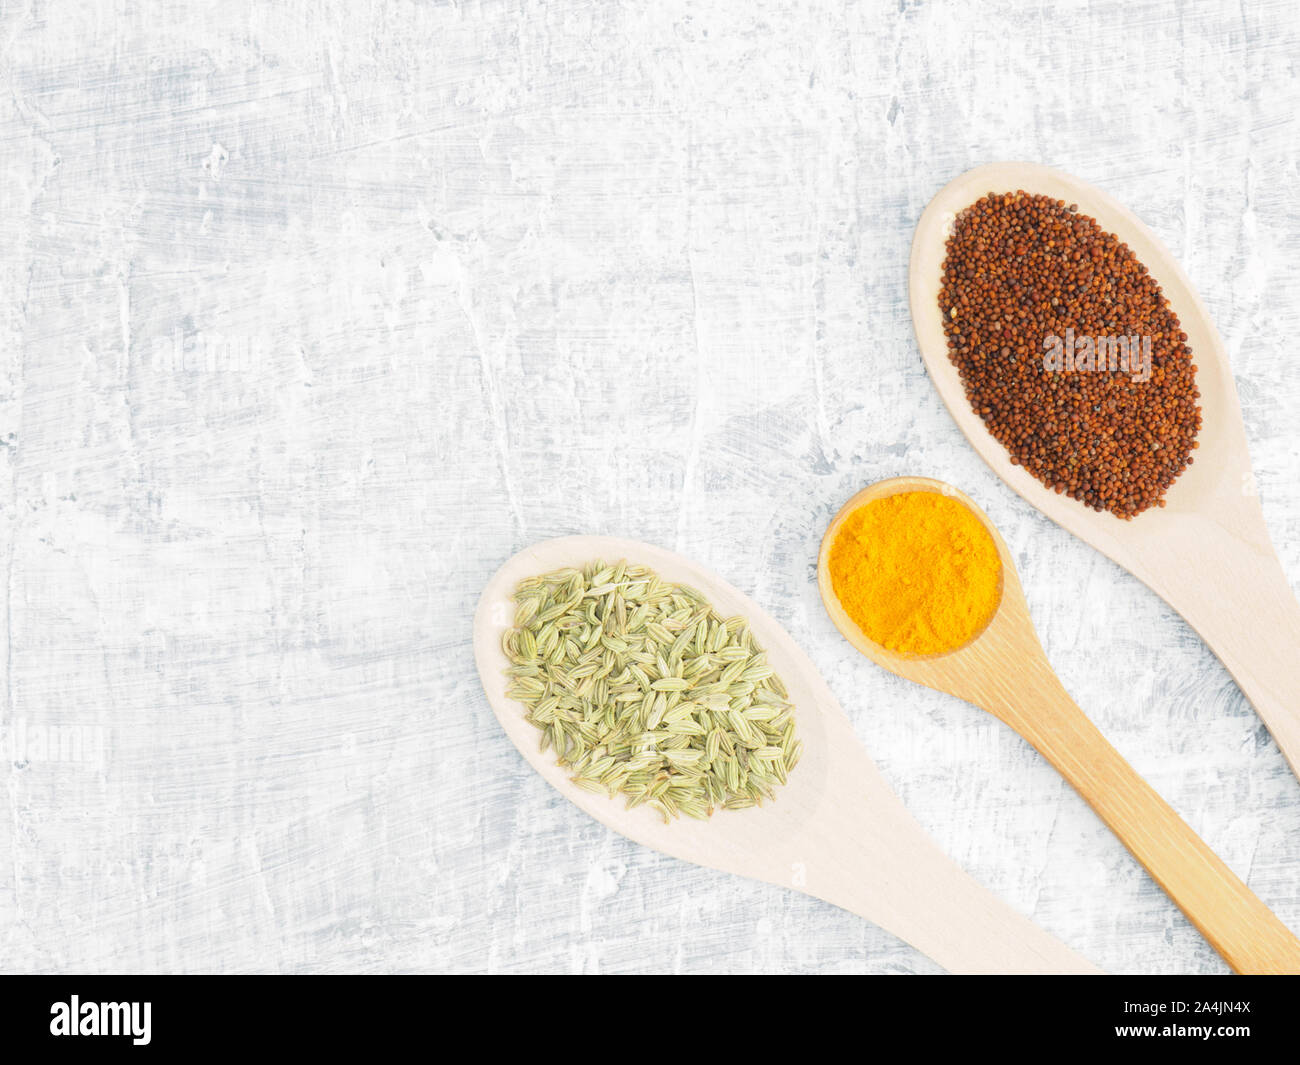 Spices and herbs set on concrete background in wooden spoon. Fennel, mustard, turmeric. Modern apothecary, naturopathy and ayurveda concept. Stock Photo